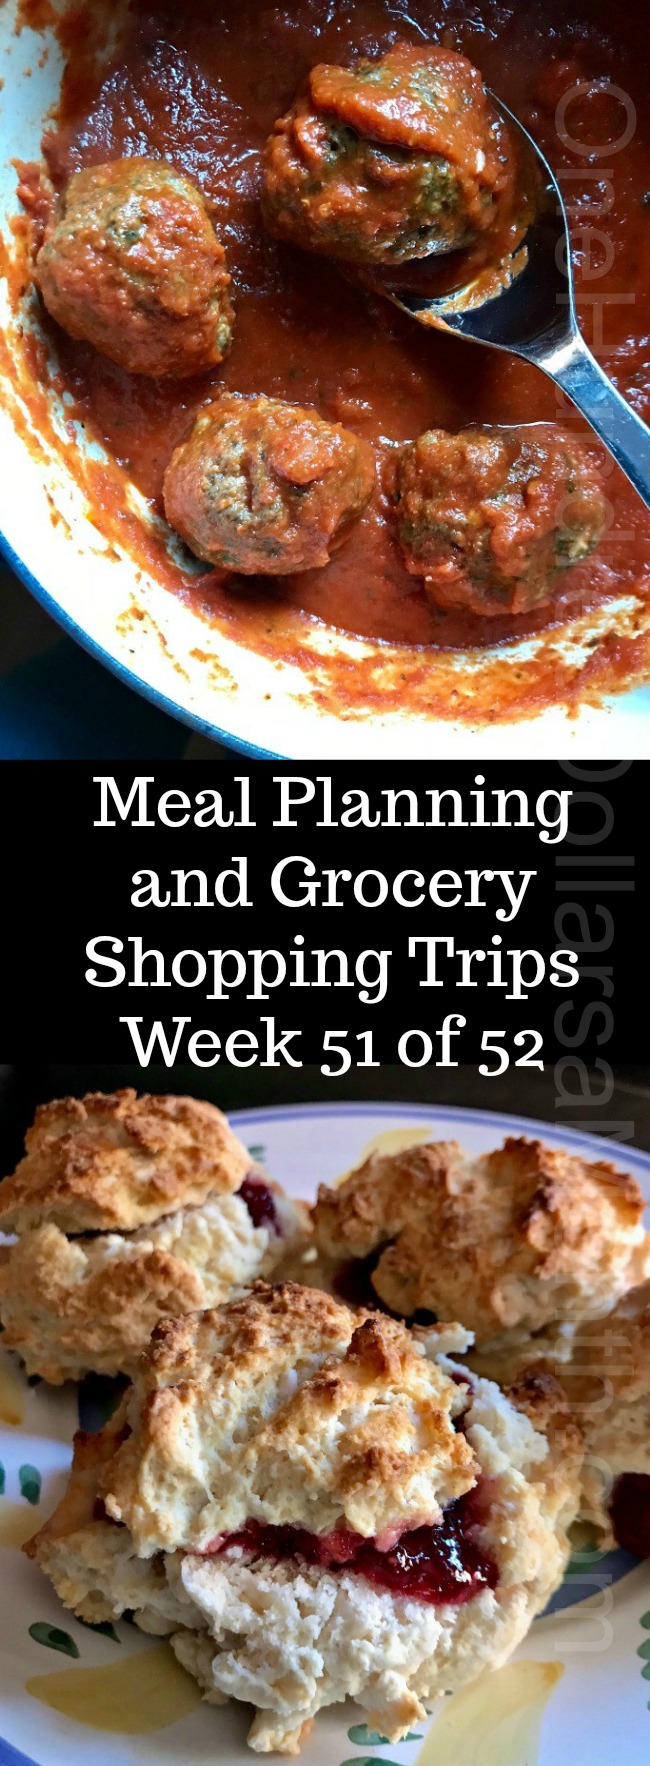 Meal Planning and Grocery Shopping Trips – Week 51 of 52